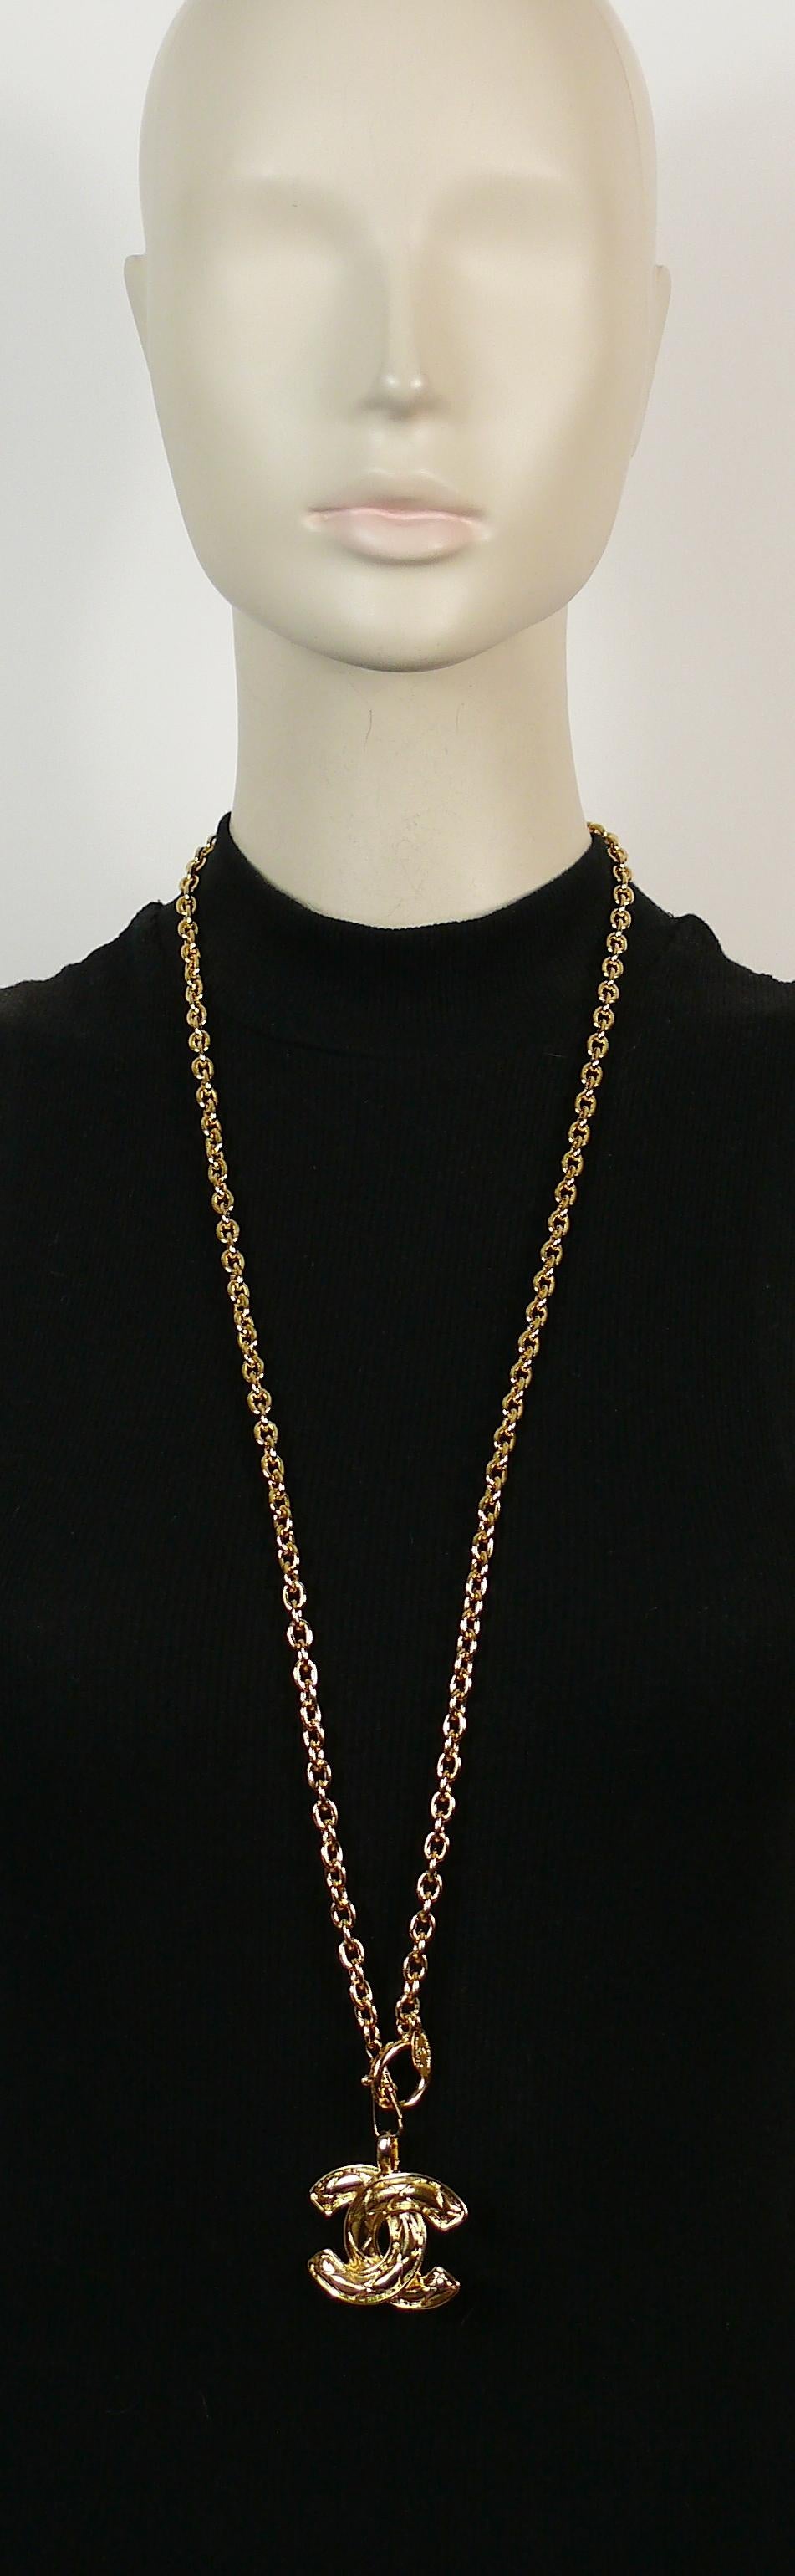 CHANEL vintage gold toned chain sautoir necklace featuring a quilted CC logo pendant.

Spring clasp closure.

Embossed CHANEL Made in France.

Indicative measurements : chain length approx. 88 cm (34.65 inches) / CC pendant (excl. bail) approx. 3.8